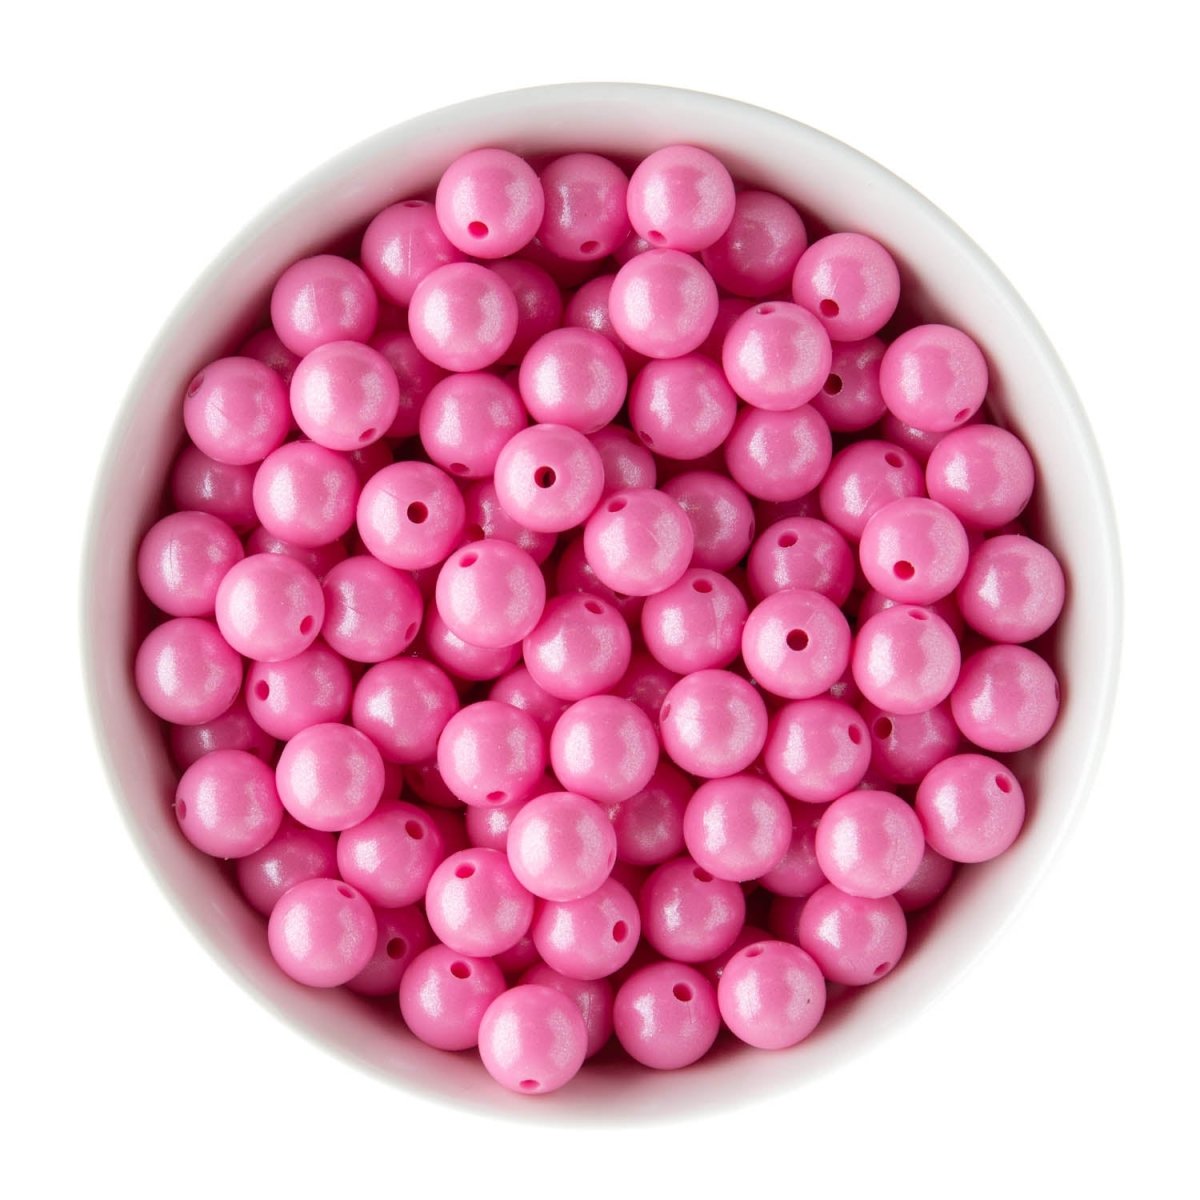 Silicone Round Beads 12mm Opal Cotton Candy Pink from Cara & Co Craft Supply